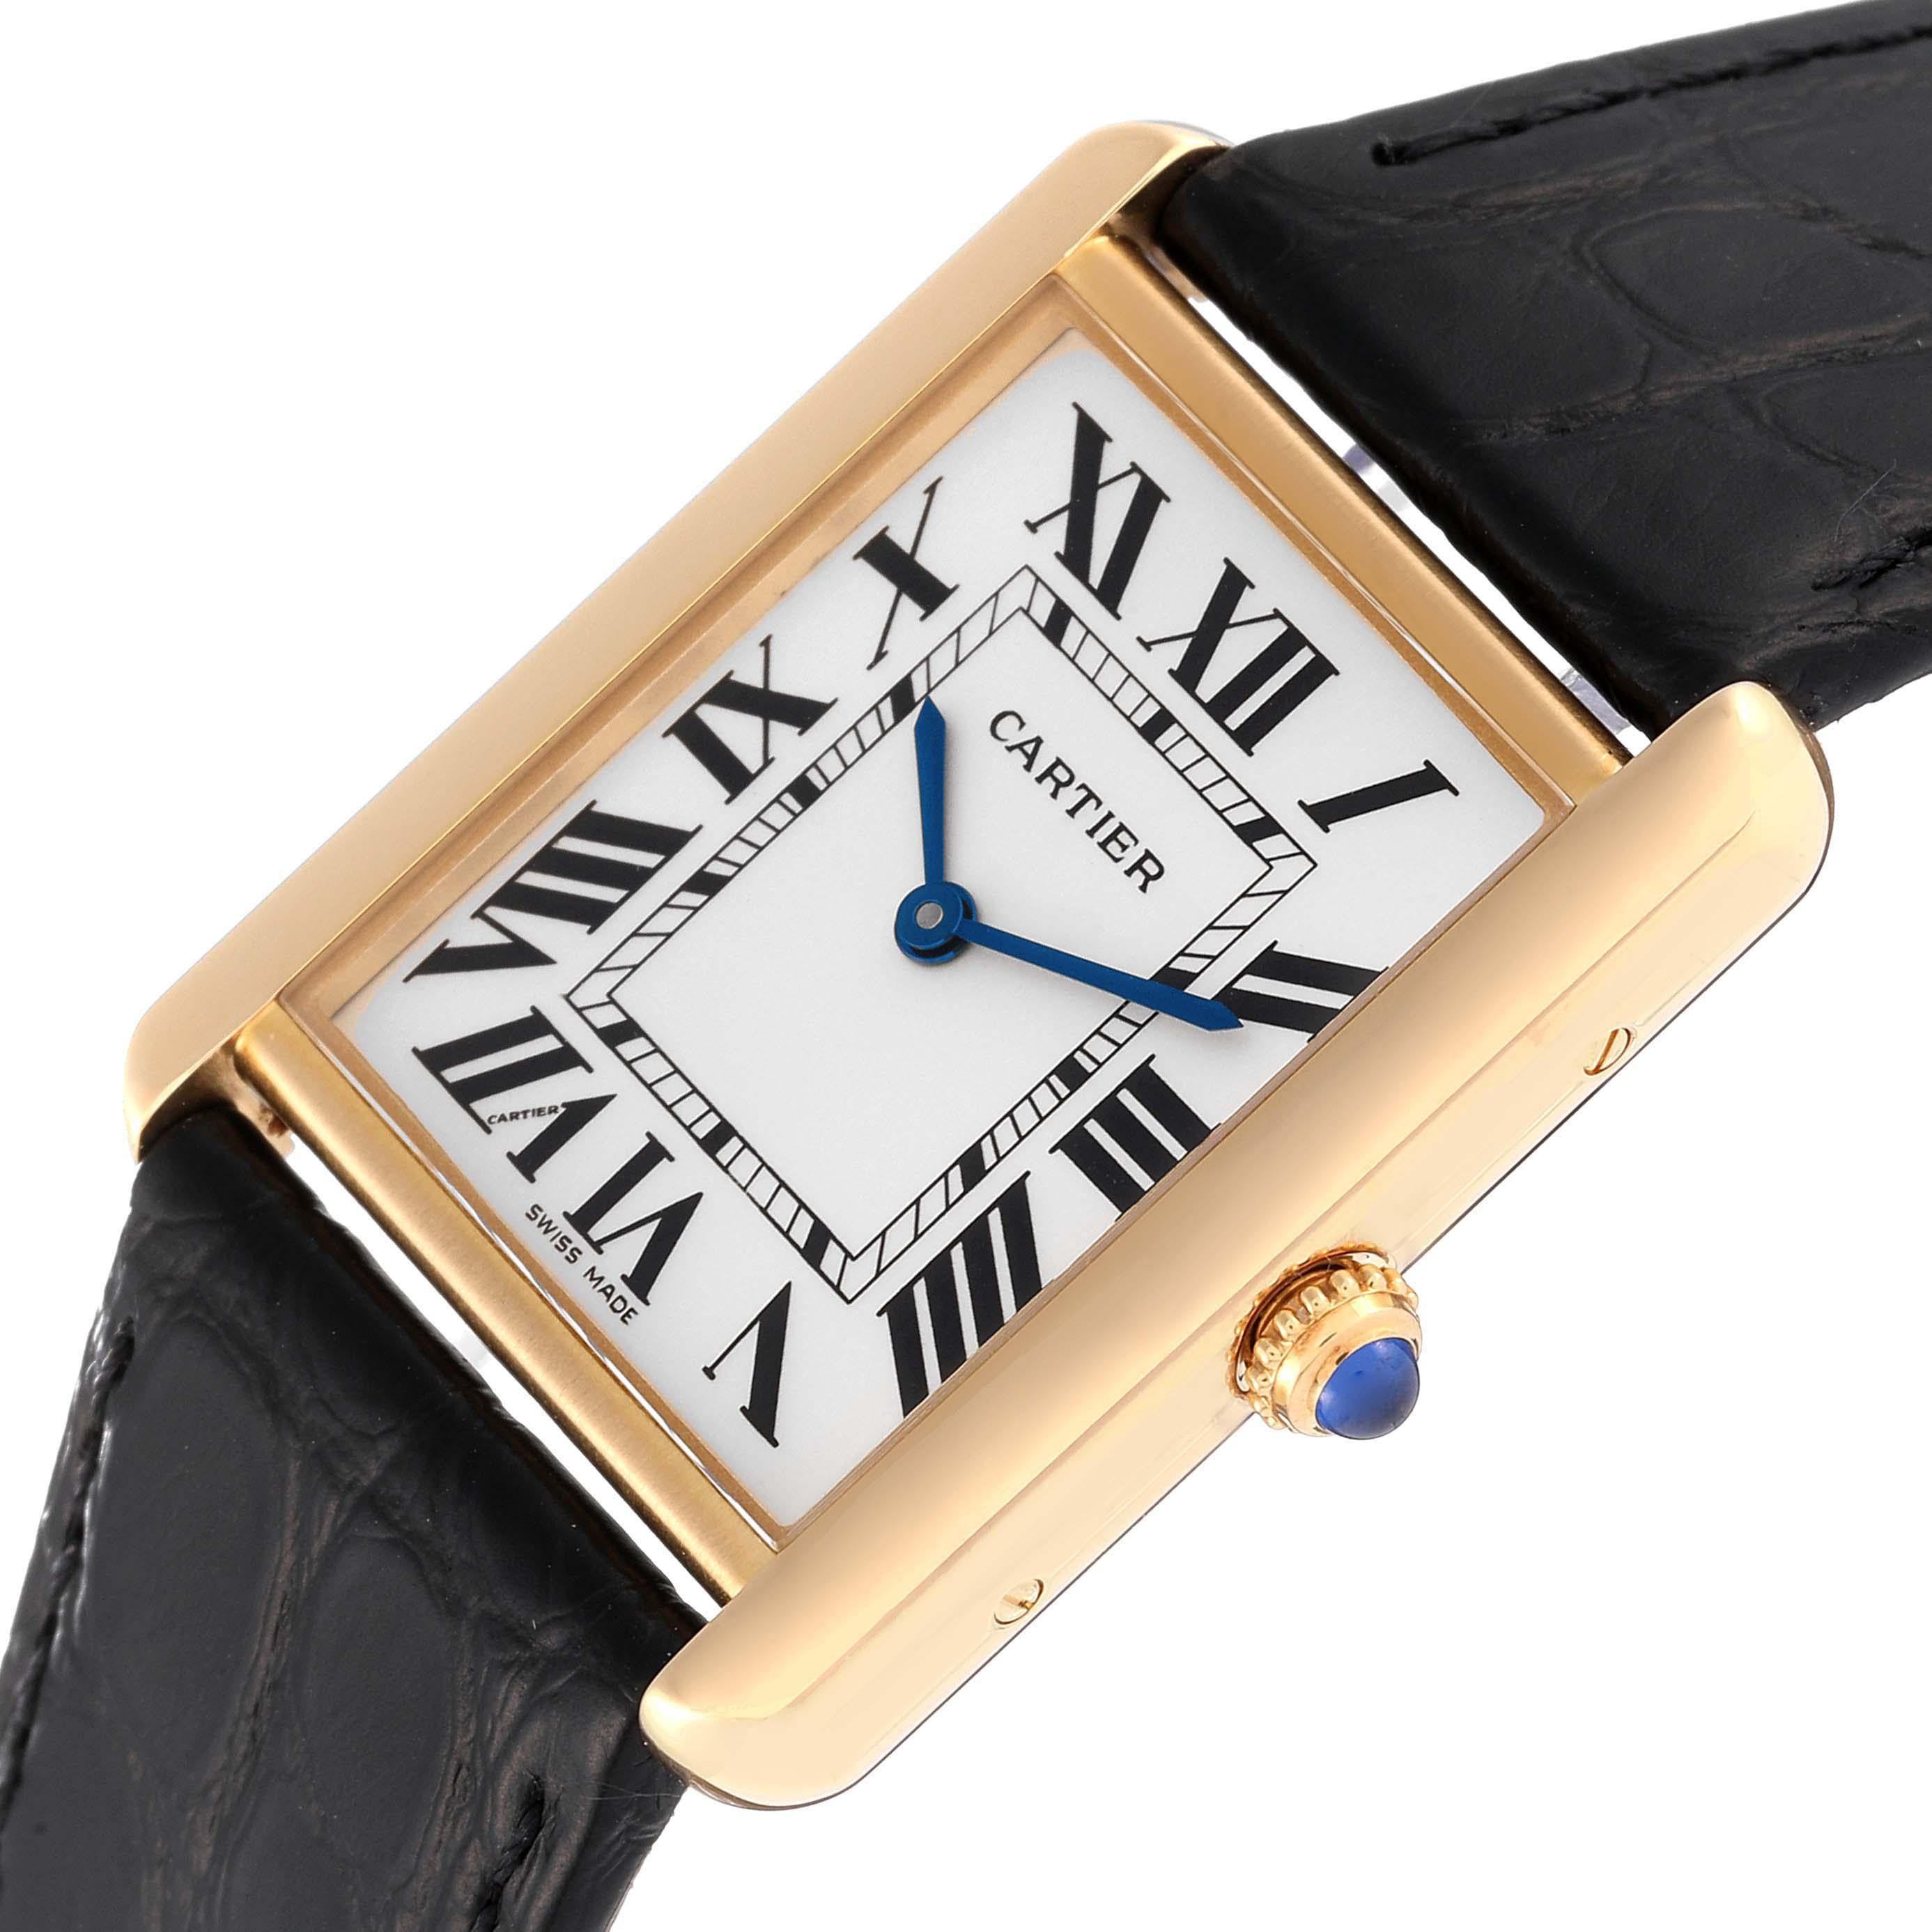 Cartier Tank Solo Large Yellow Gold Steel Mens Watch W5200004 Papers. Quartz movement. 18k yellow gold case 34 mm x 27 mm. Stainless steel caseback. Circular grained crown set with a blue spinel cabochon. . Scratch resistant sapphire crystal. Silver